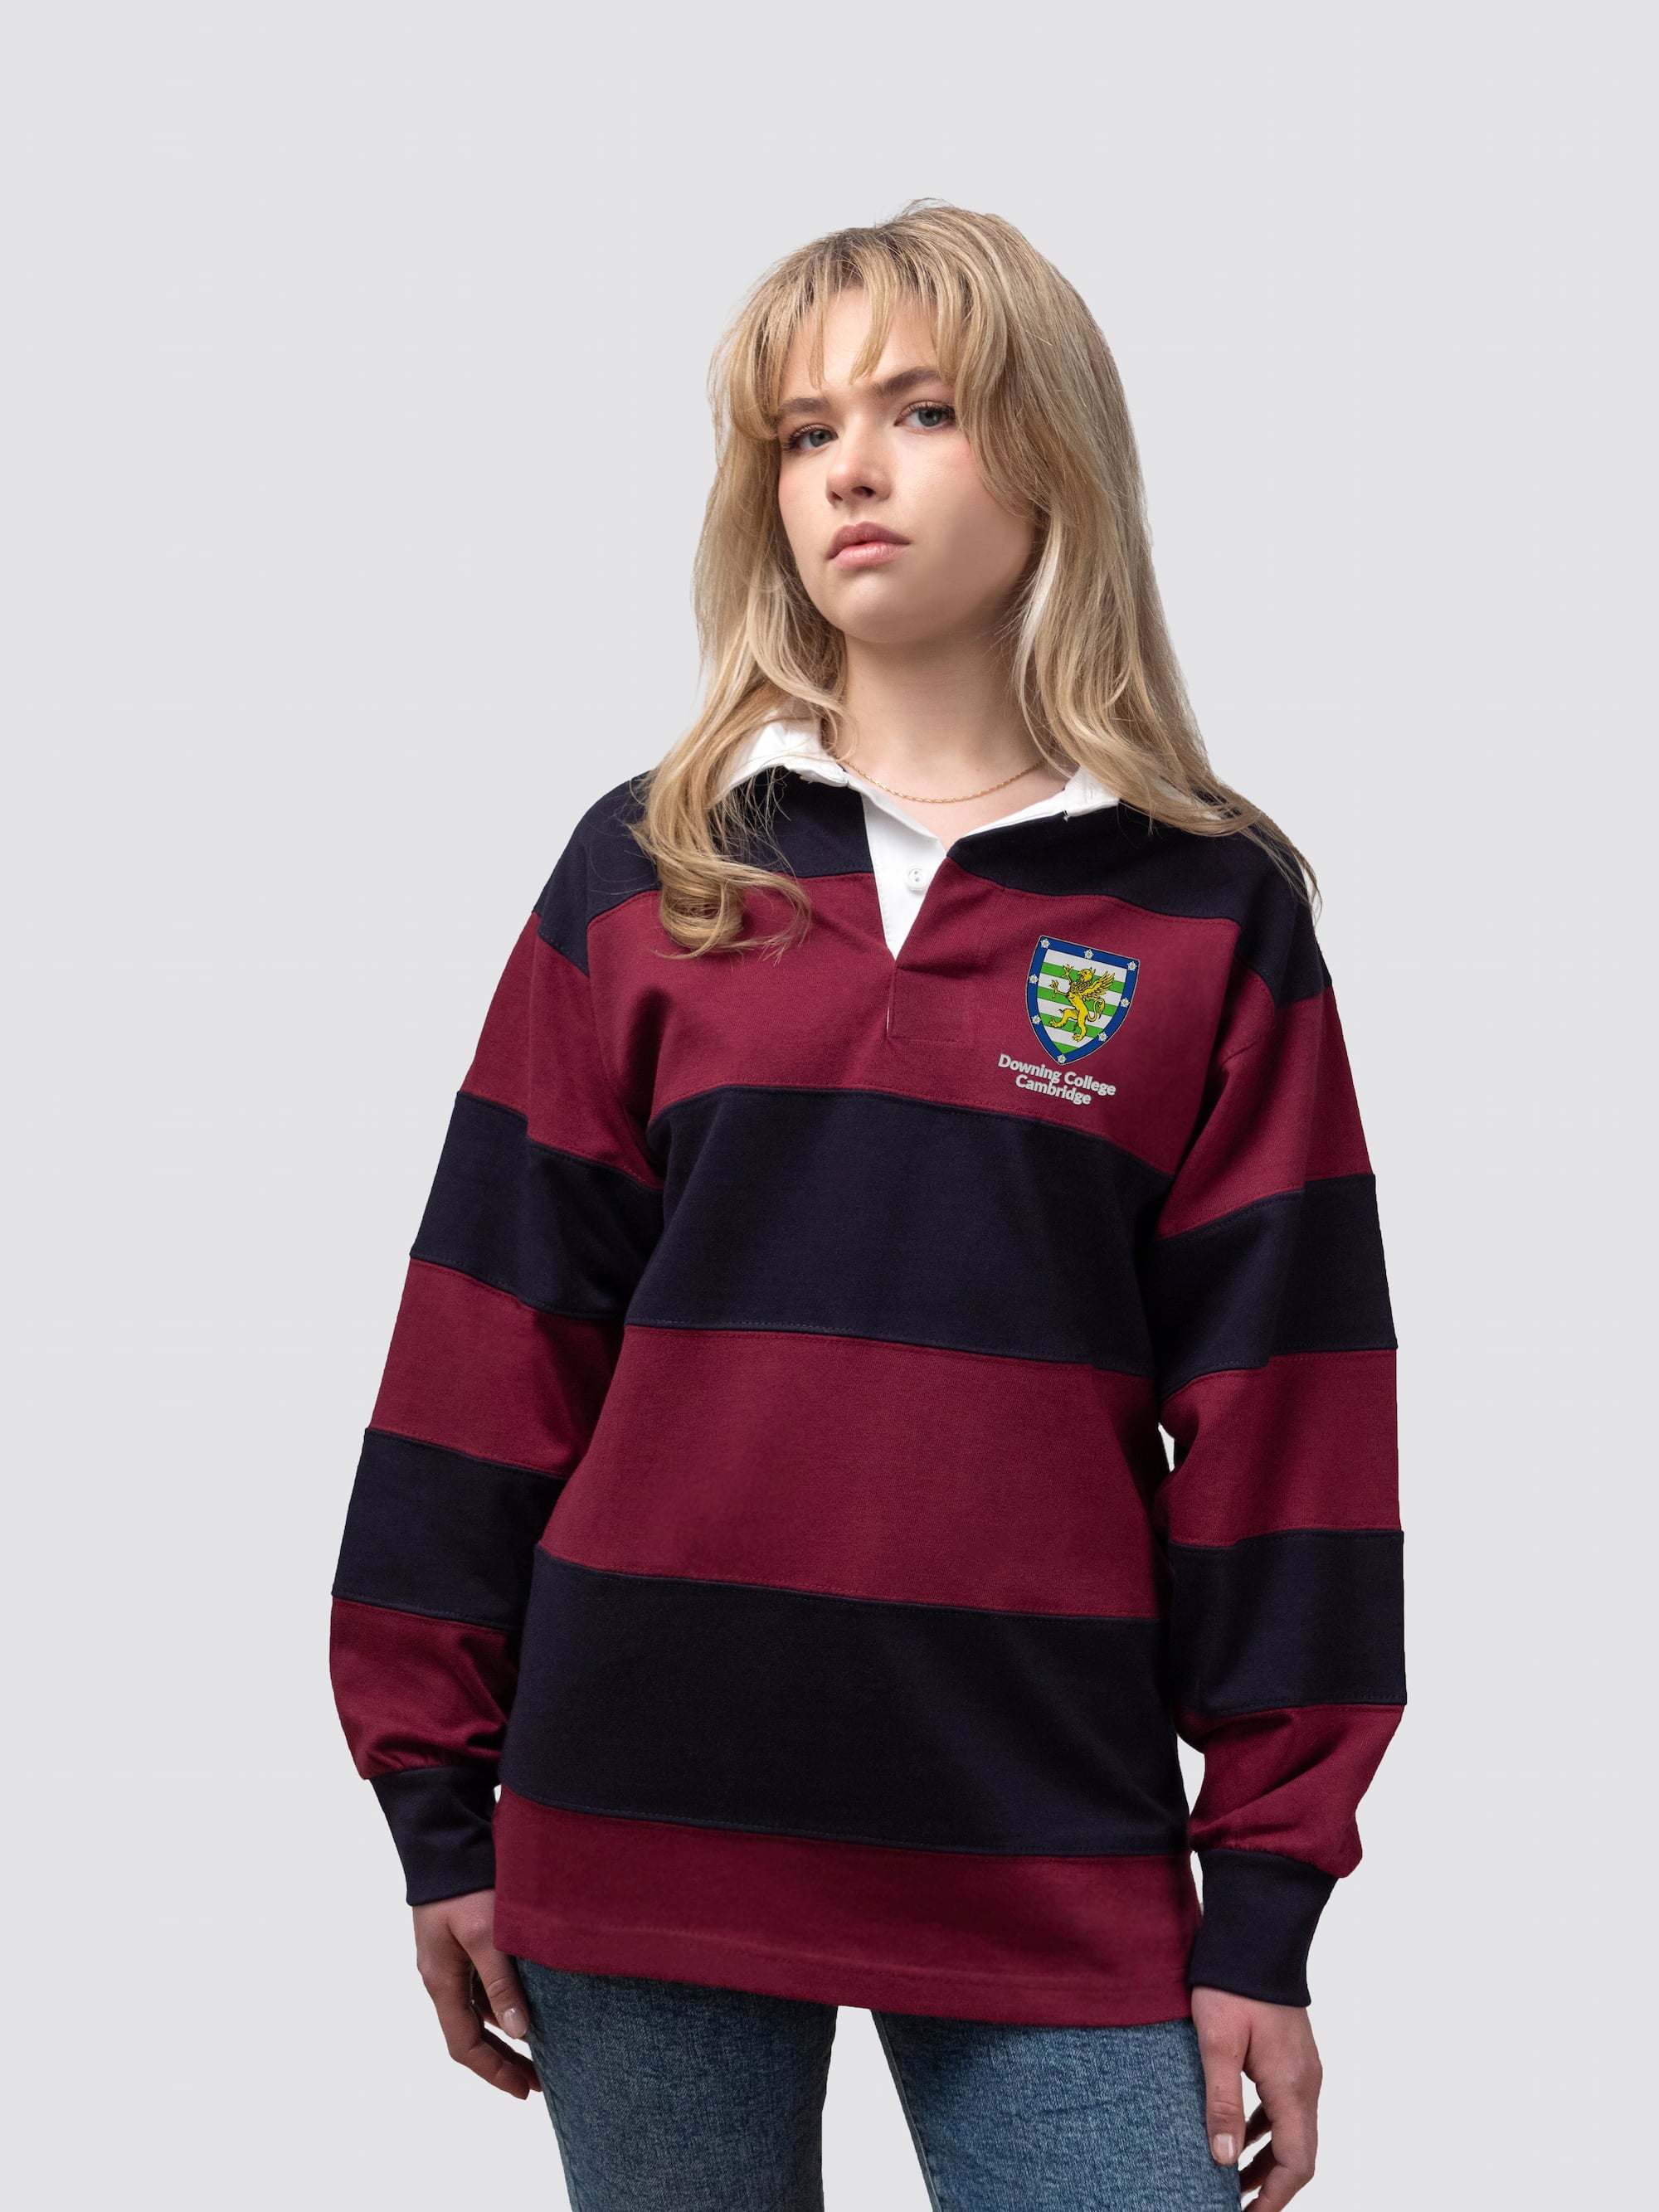 Downing College rugby shirt, with burgundy and navy stripes